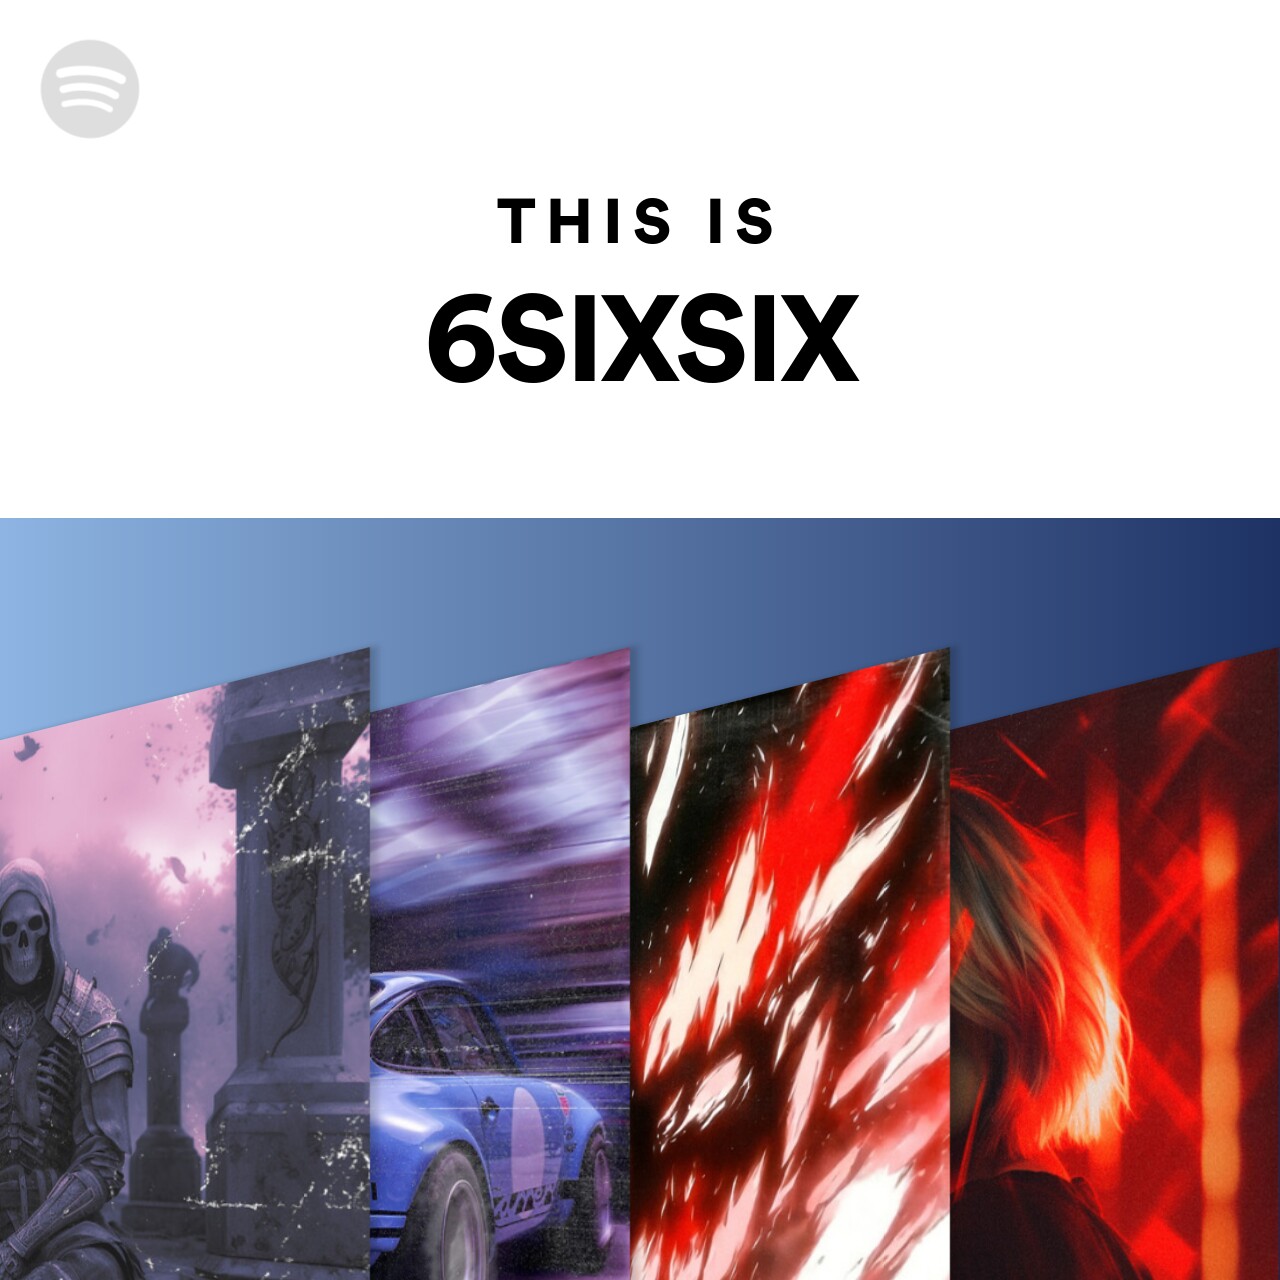 This Is 6SIXSIX